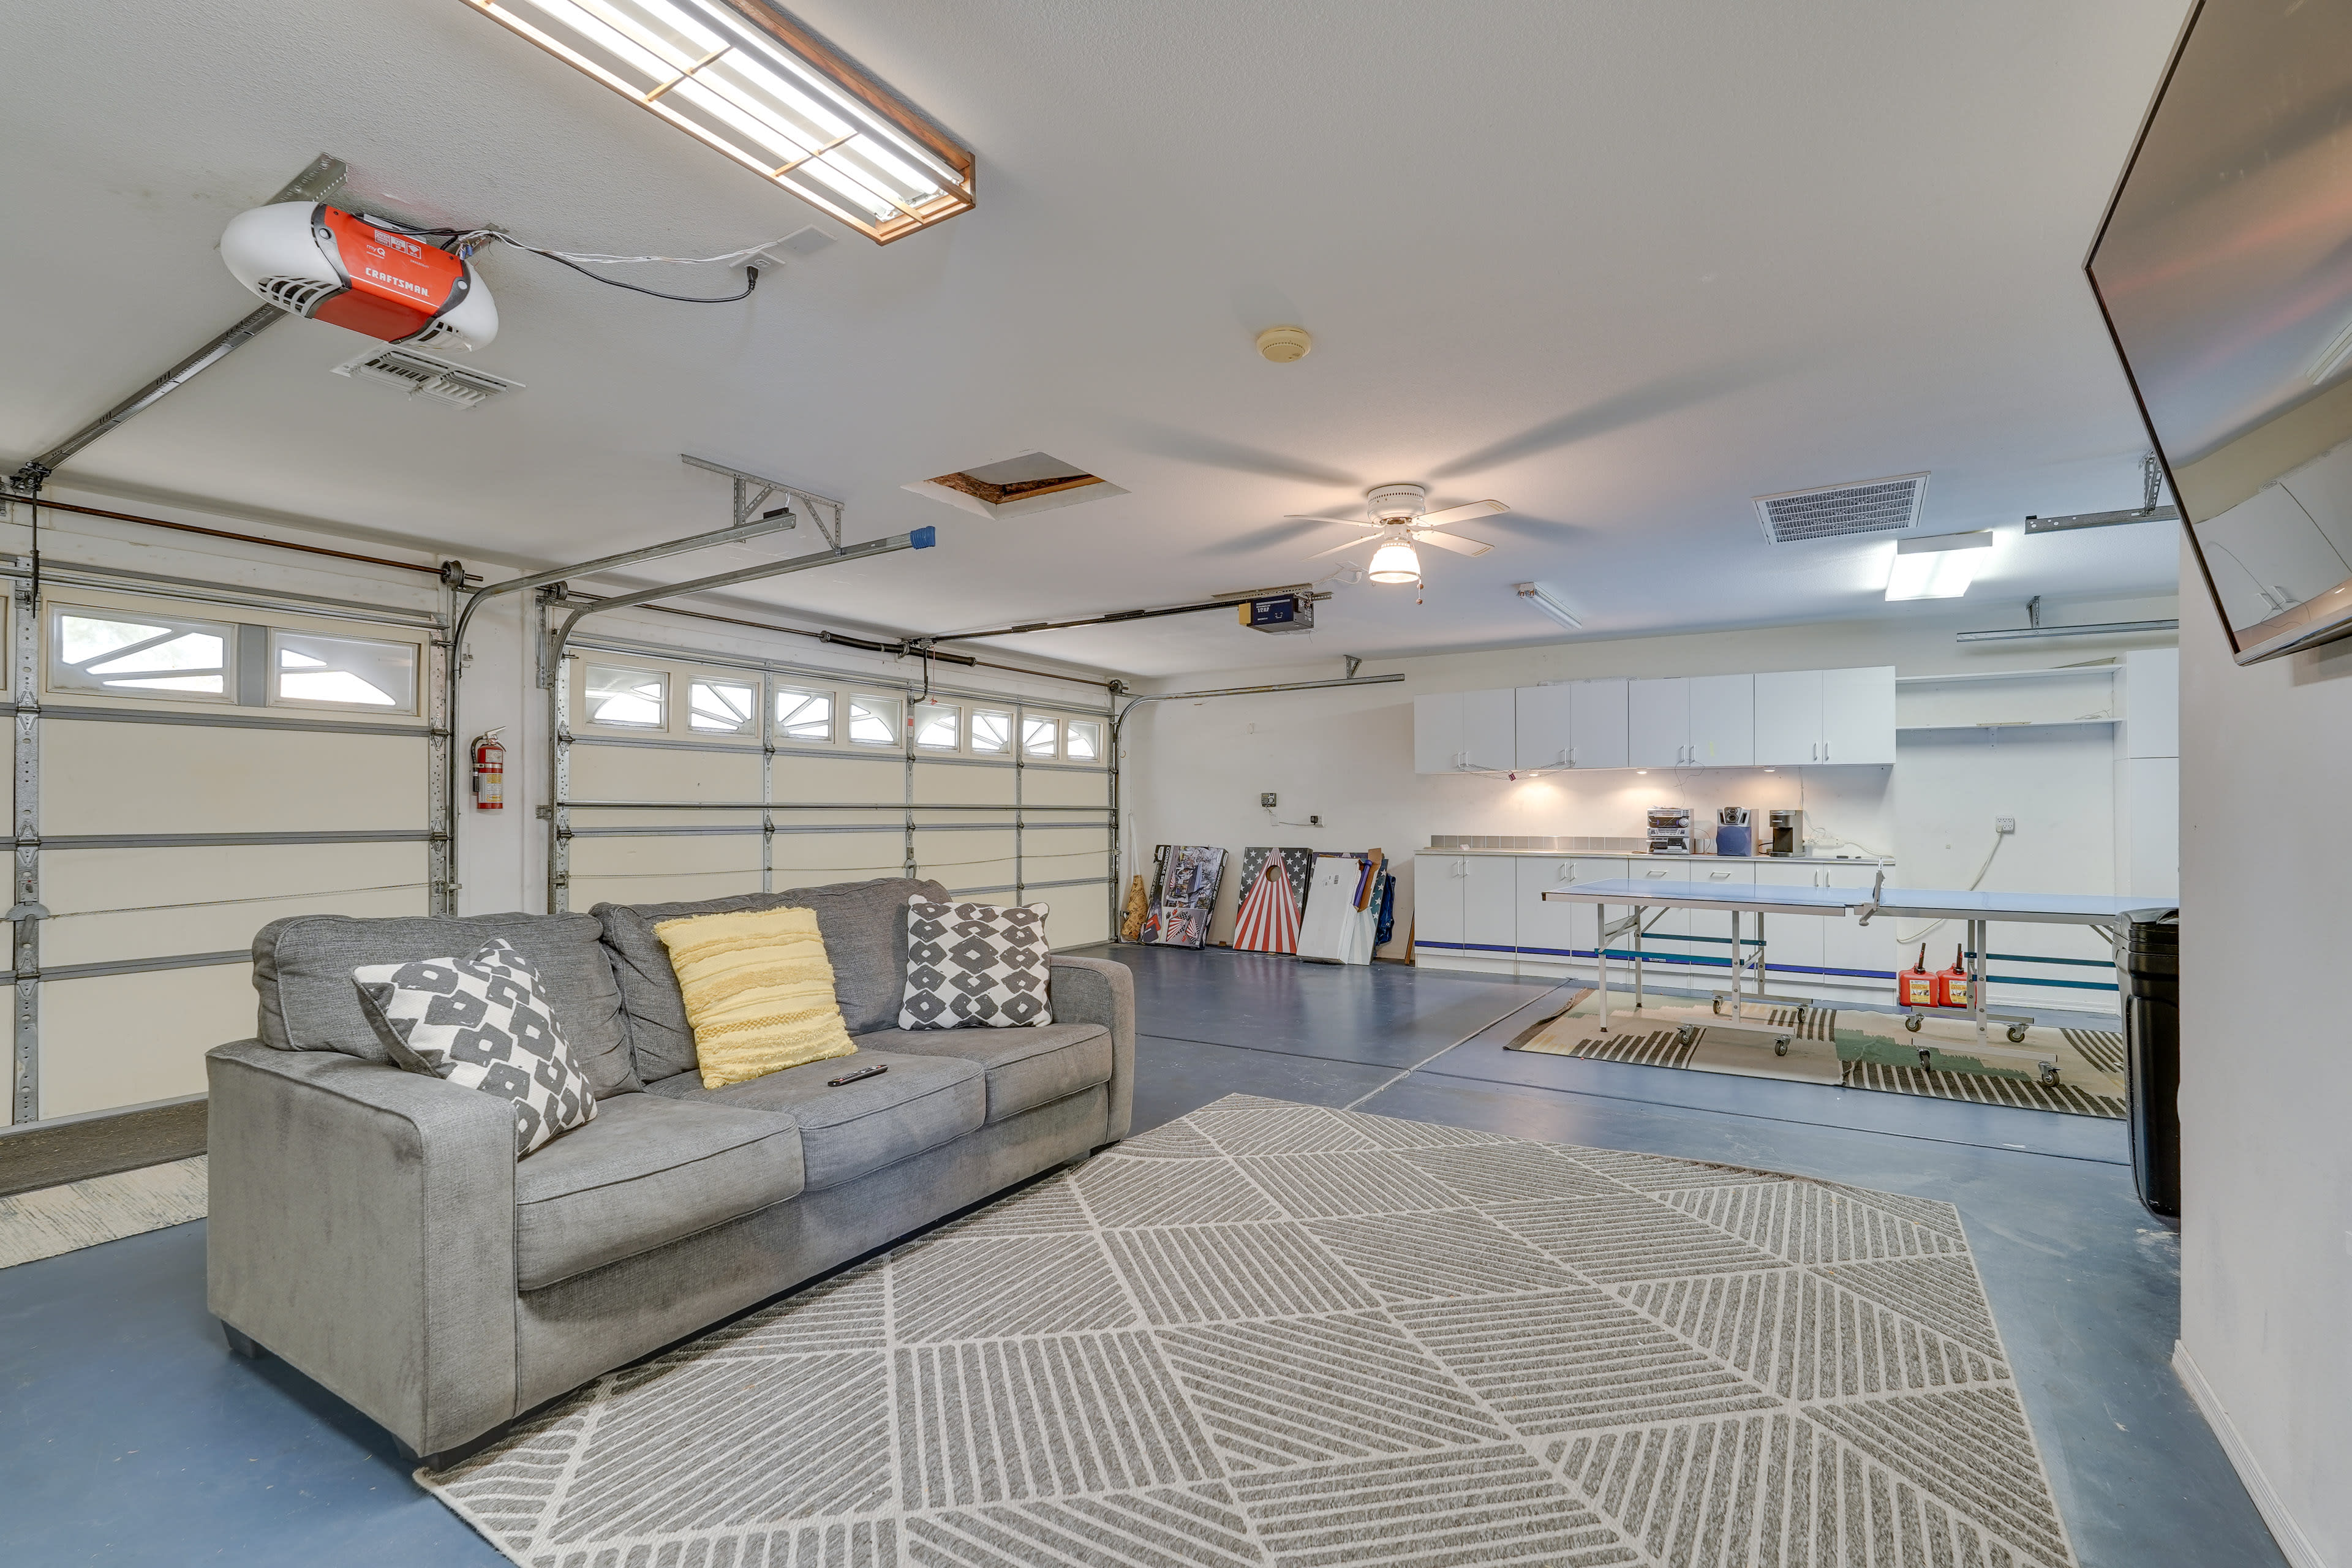 Game Room | Finished Garage w/ A/C | Ping-Pong Table | Full Sleeper Sofa